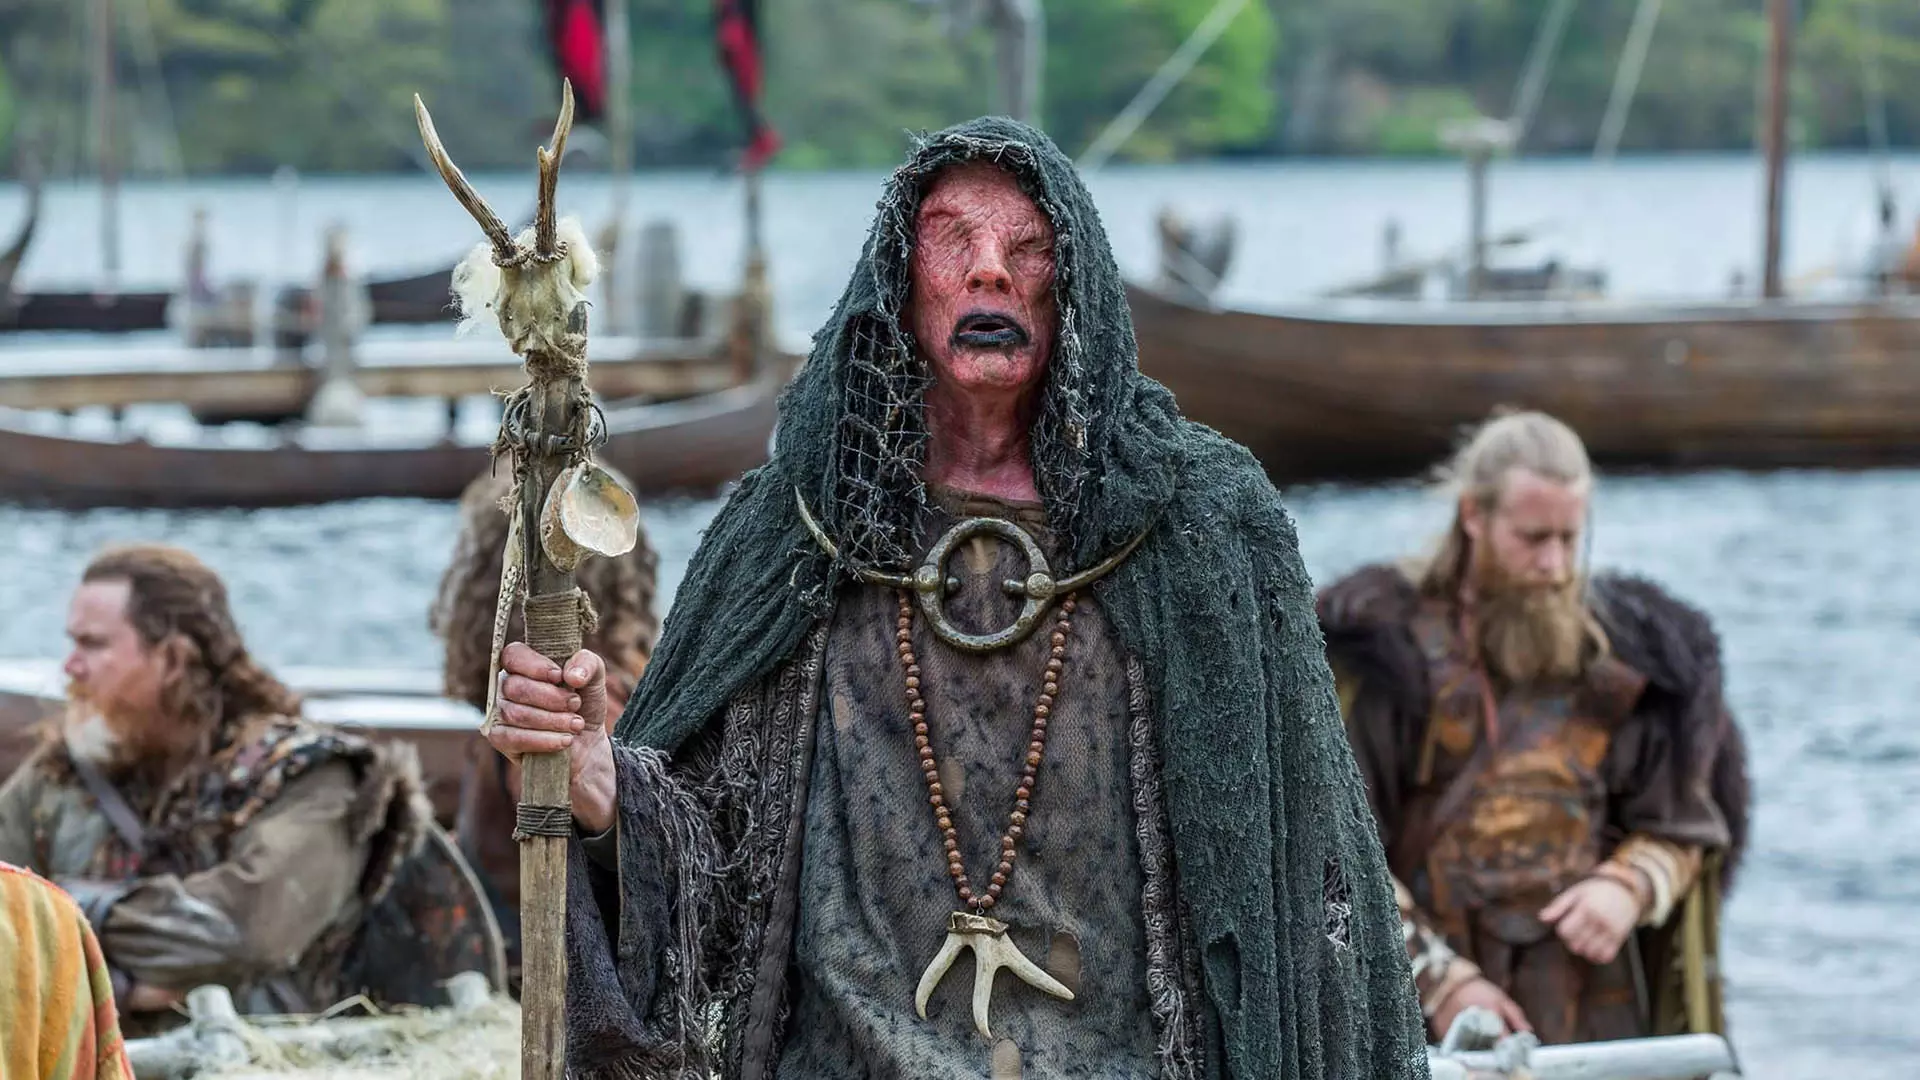 Garlic character or the same fortune teller in the vikings series